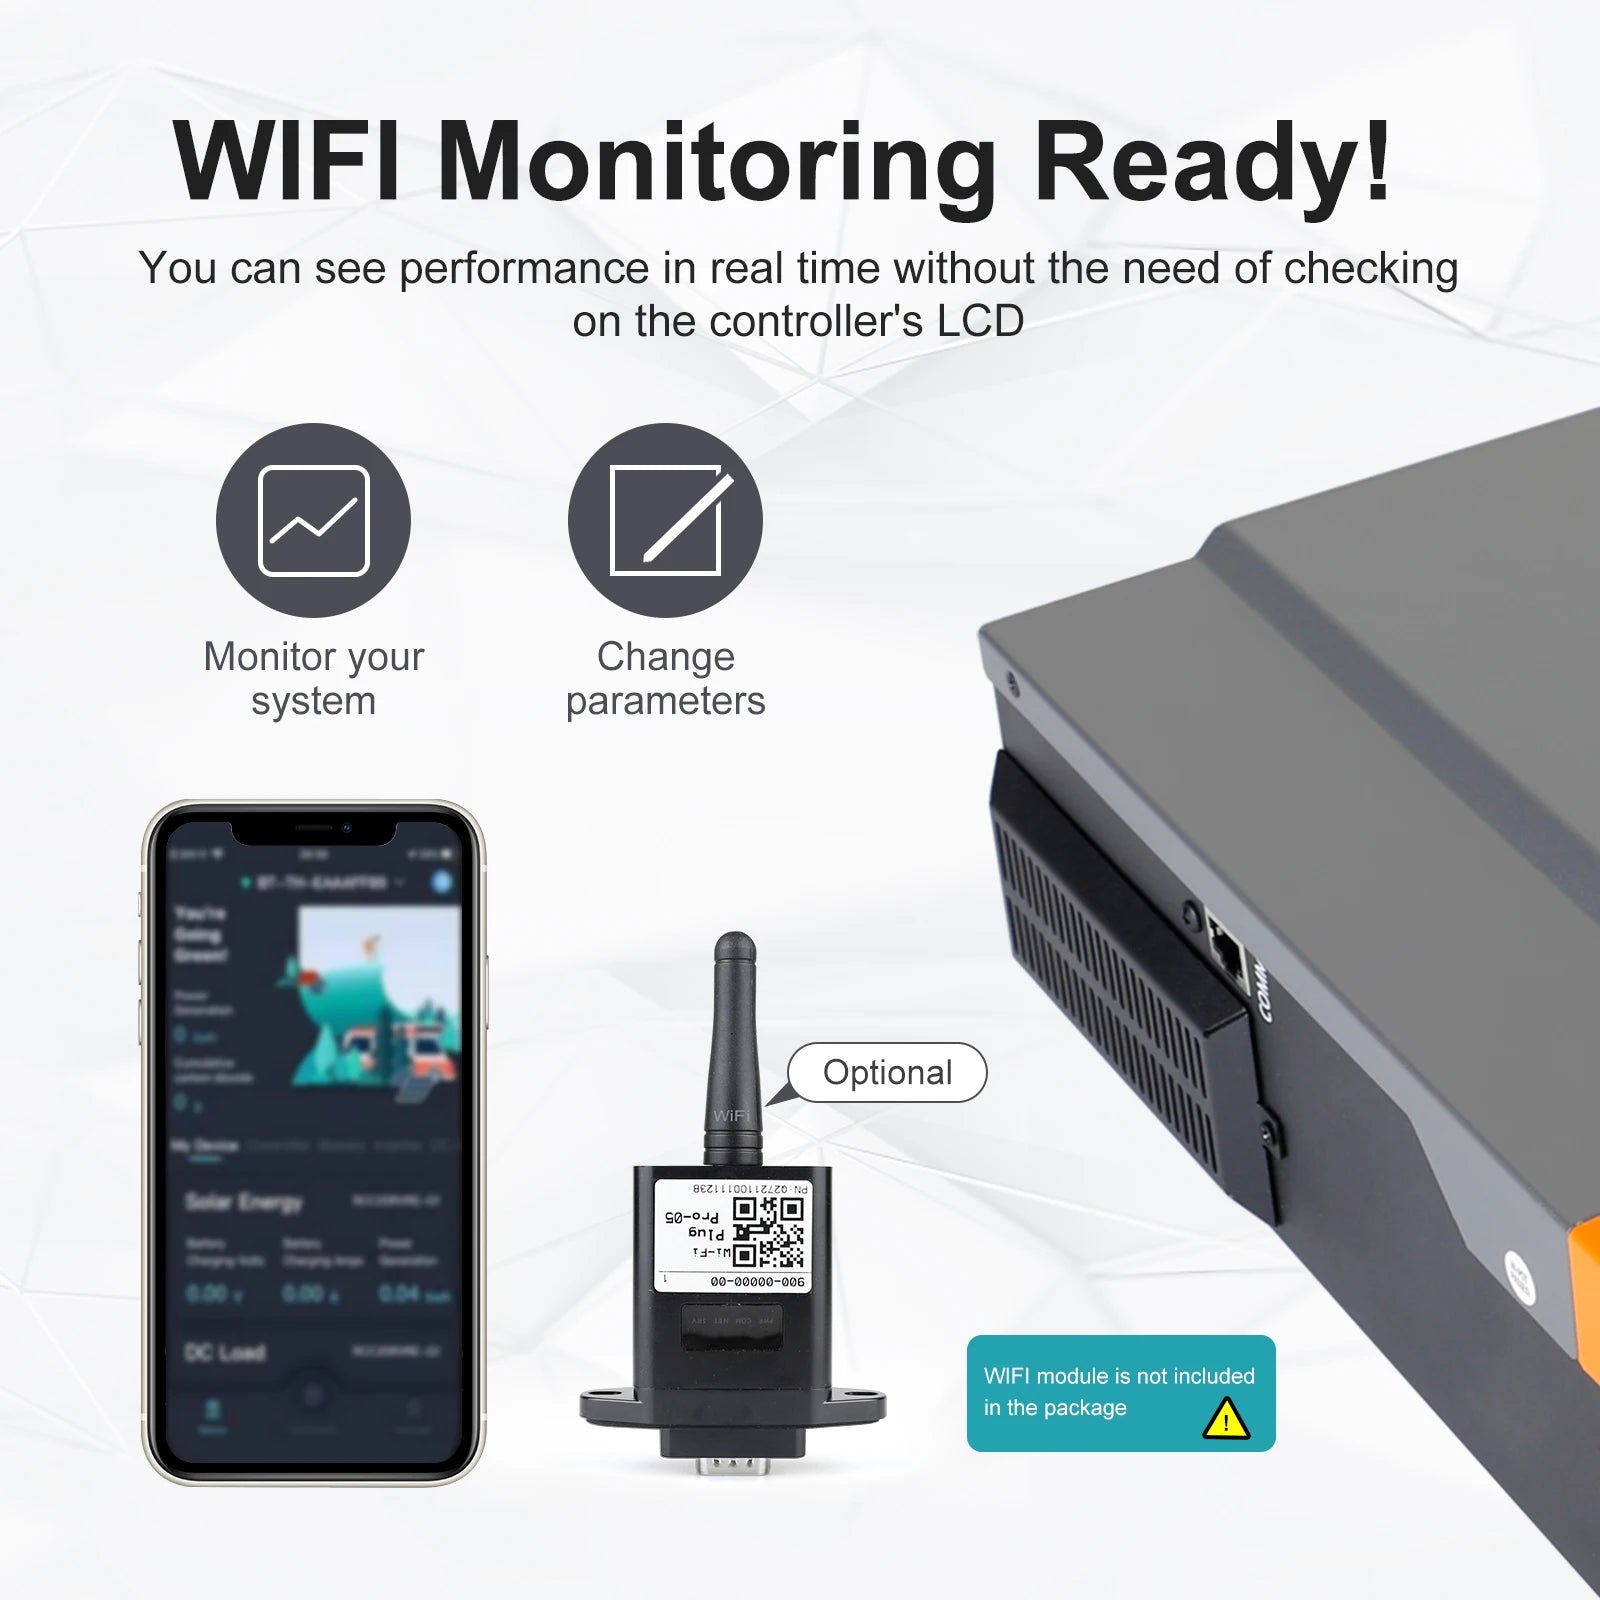 PowMr Hybrid Solar Inverter, Real-time system monitoring via WiFi, no LCD required, adjust settings instantly.